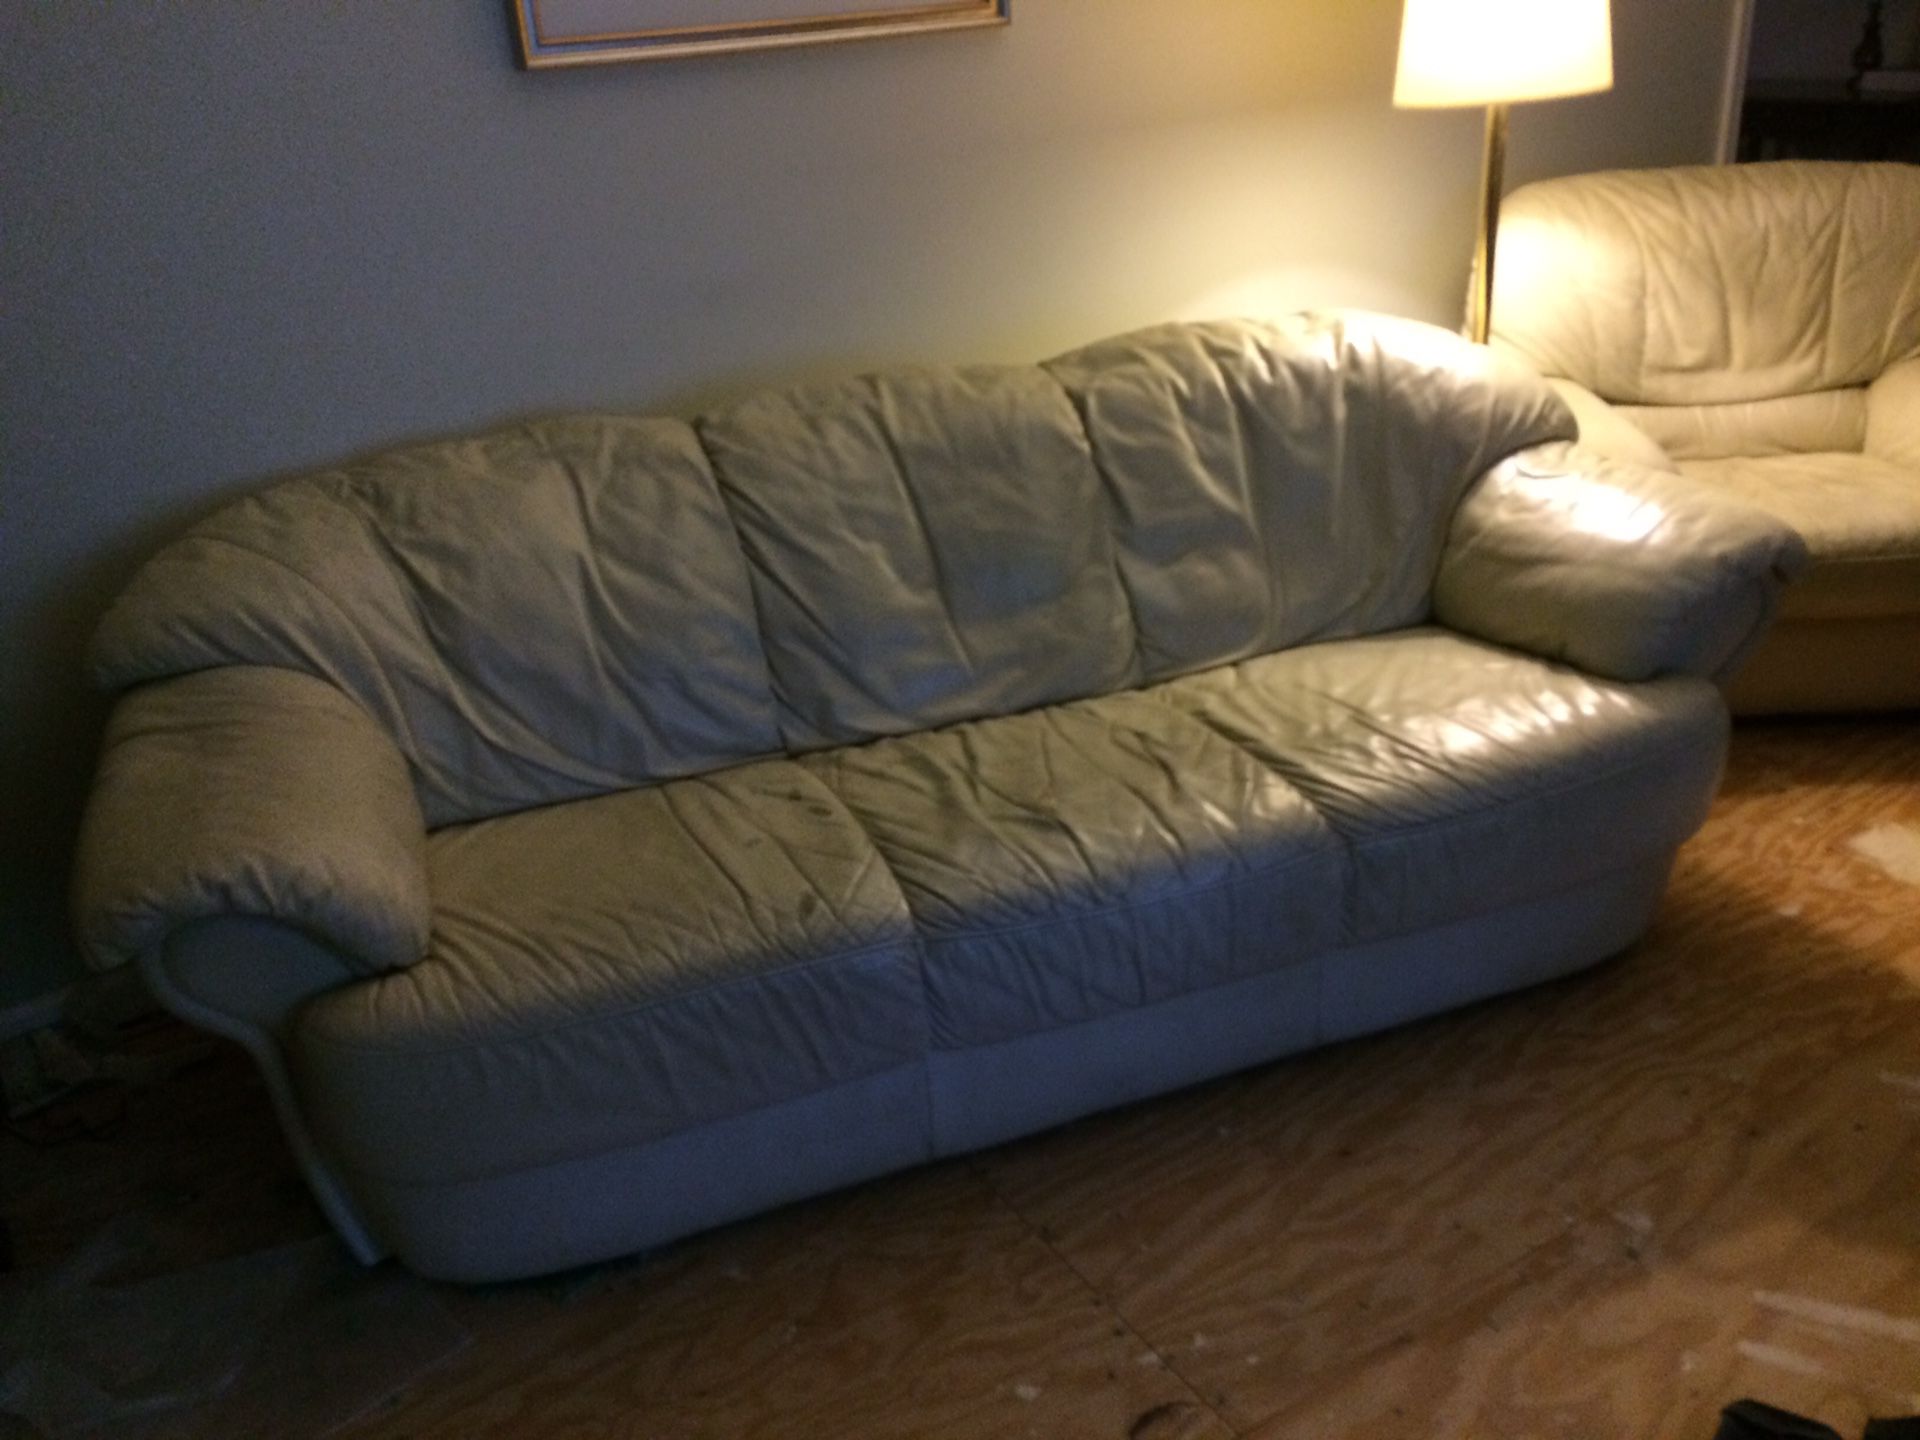 Free - sturdy and comfortable well made leather used sofa and chair